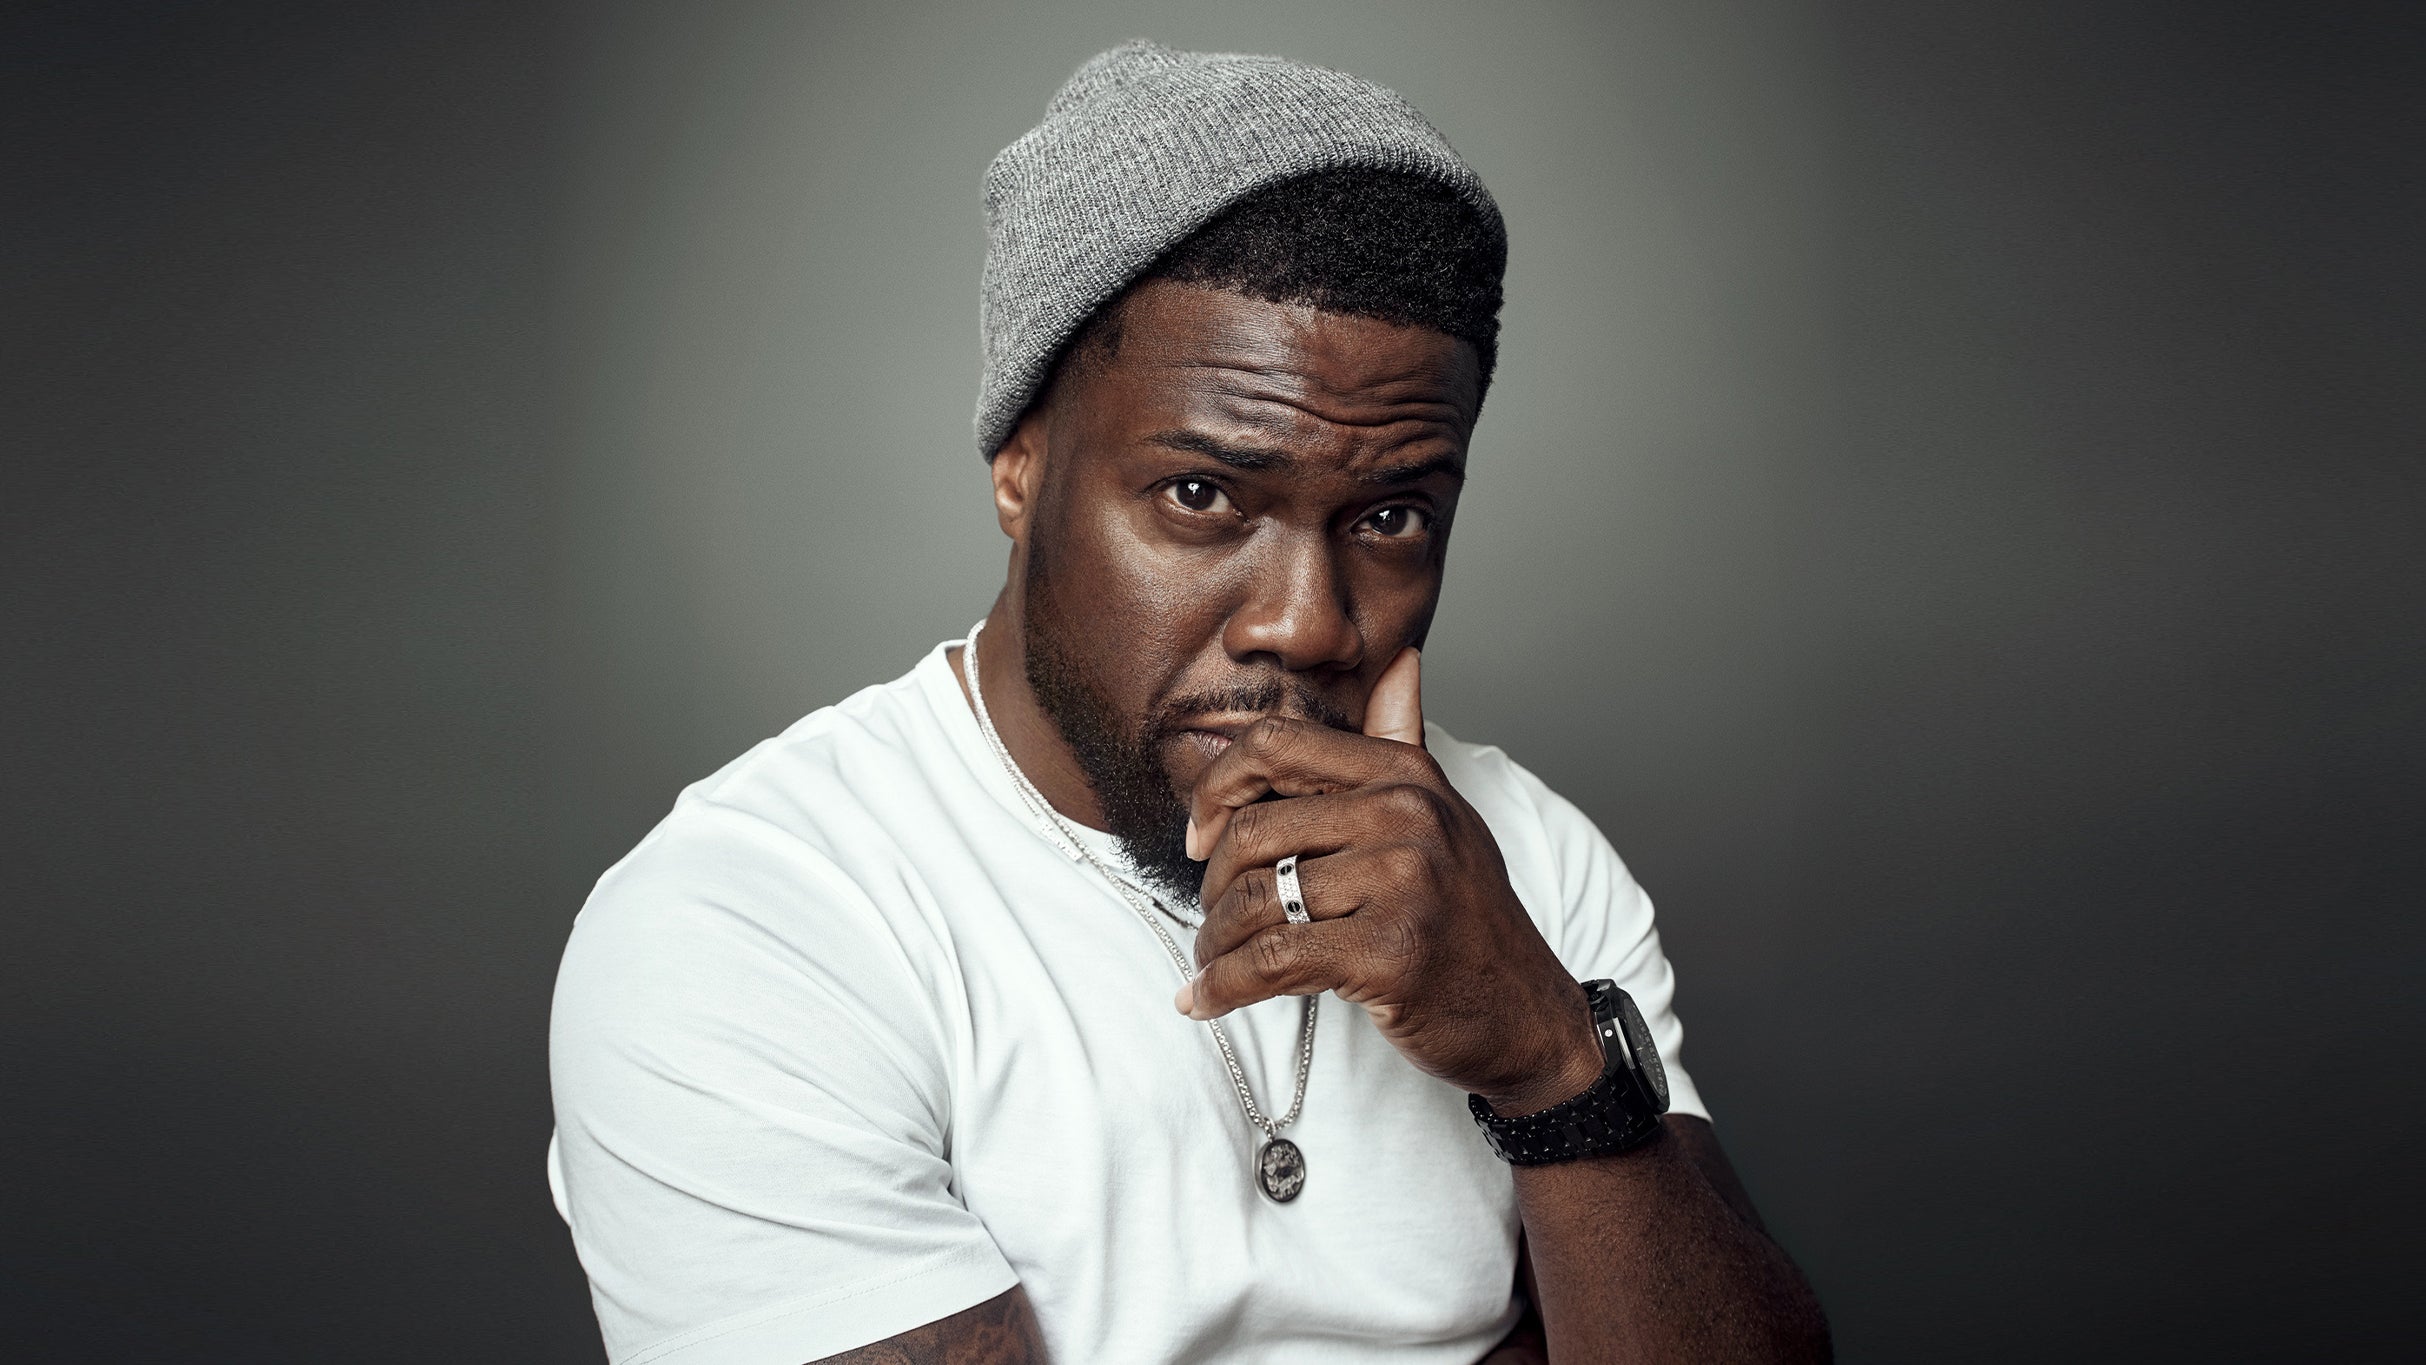 A Glimpse at Kevin Hart's Net Worth and Business Ventures